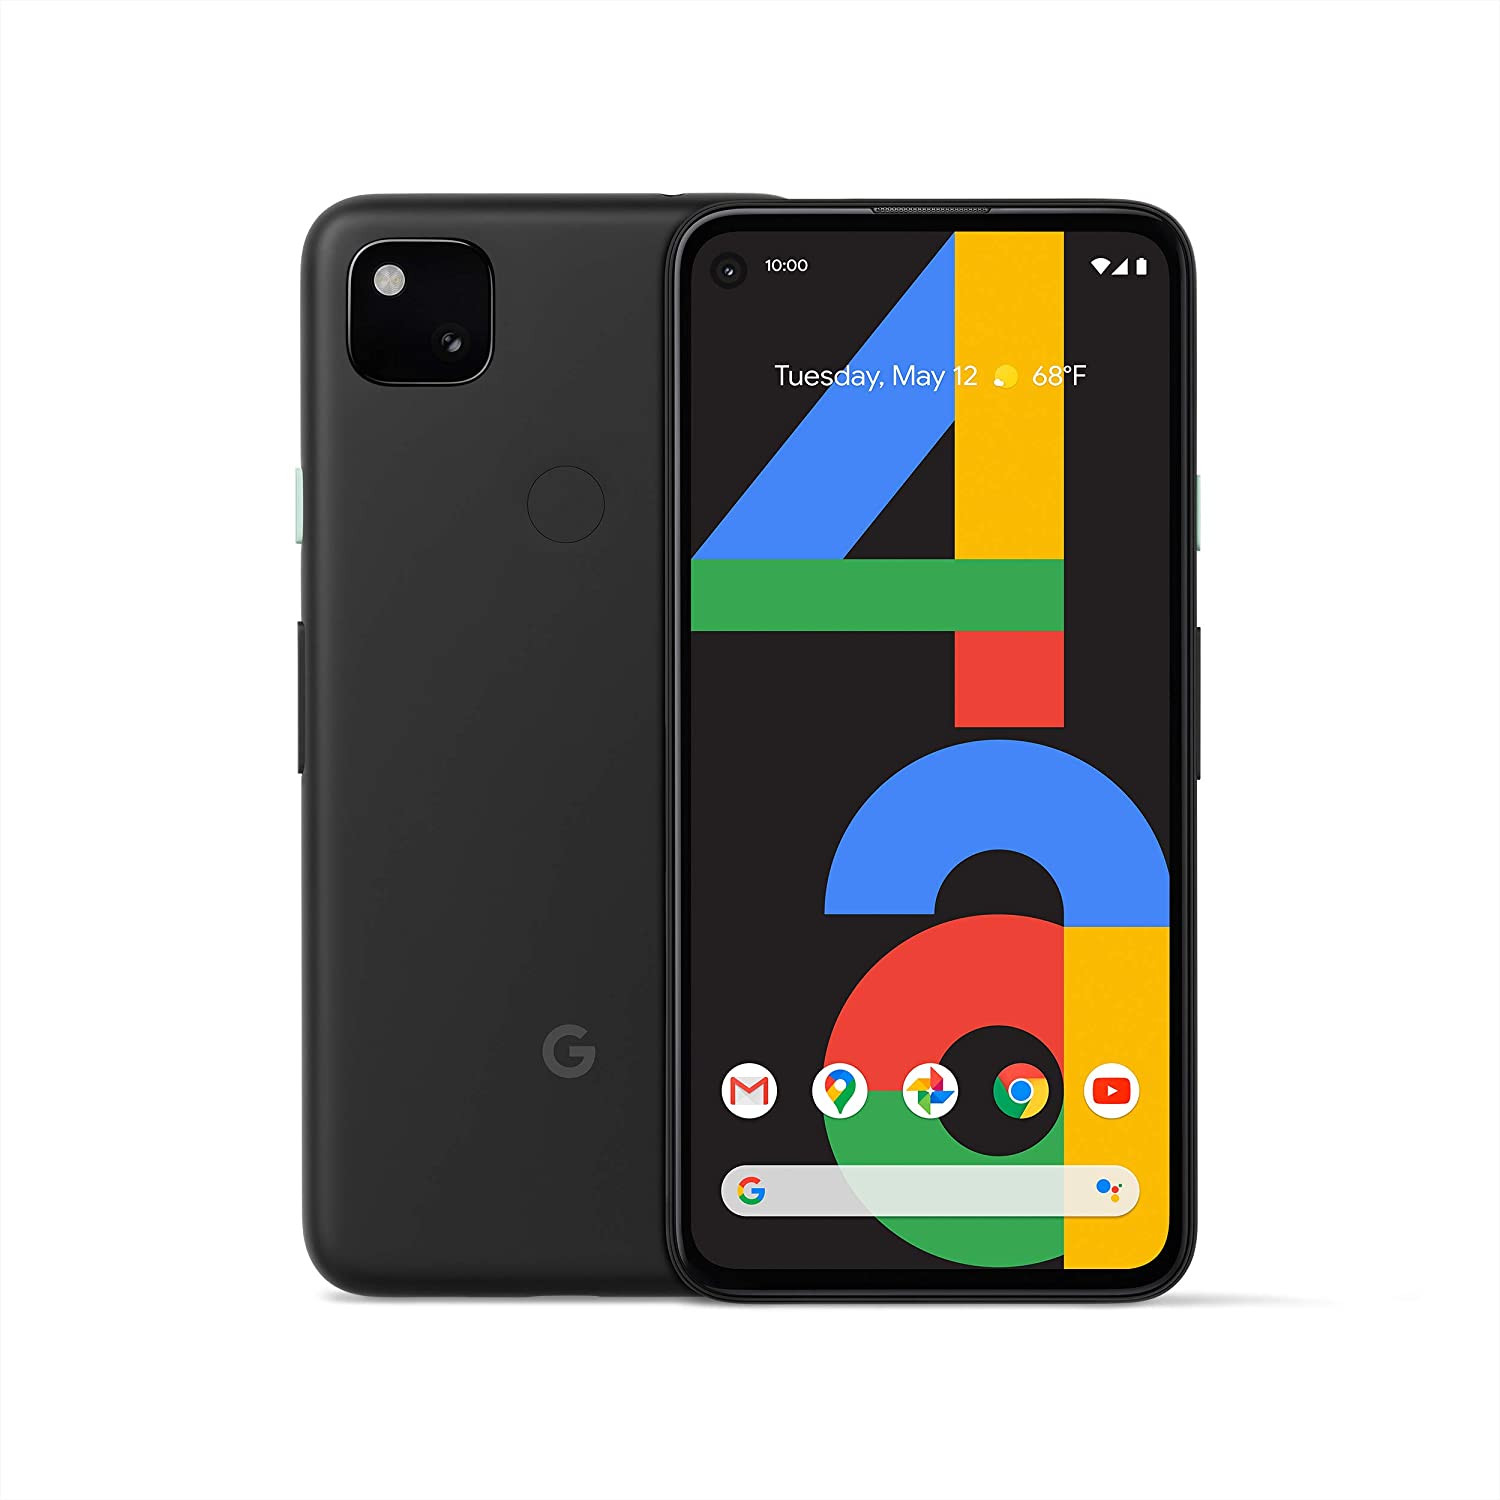 Up to 24 Hour Battery New Unlocked Android Smartphone Google Pixel 4a 128 GB of Storage Just Black